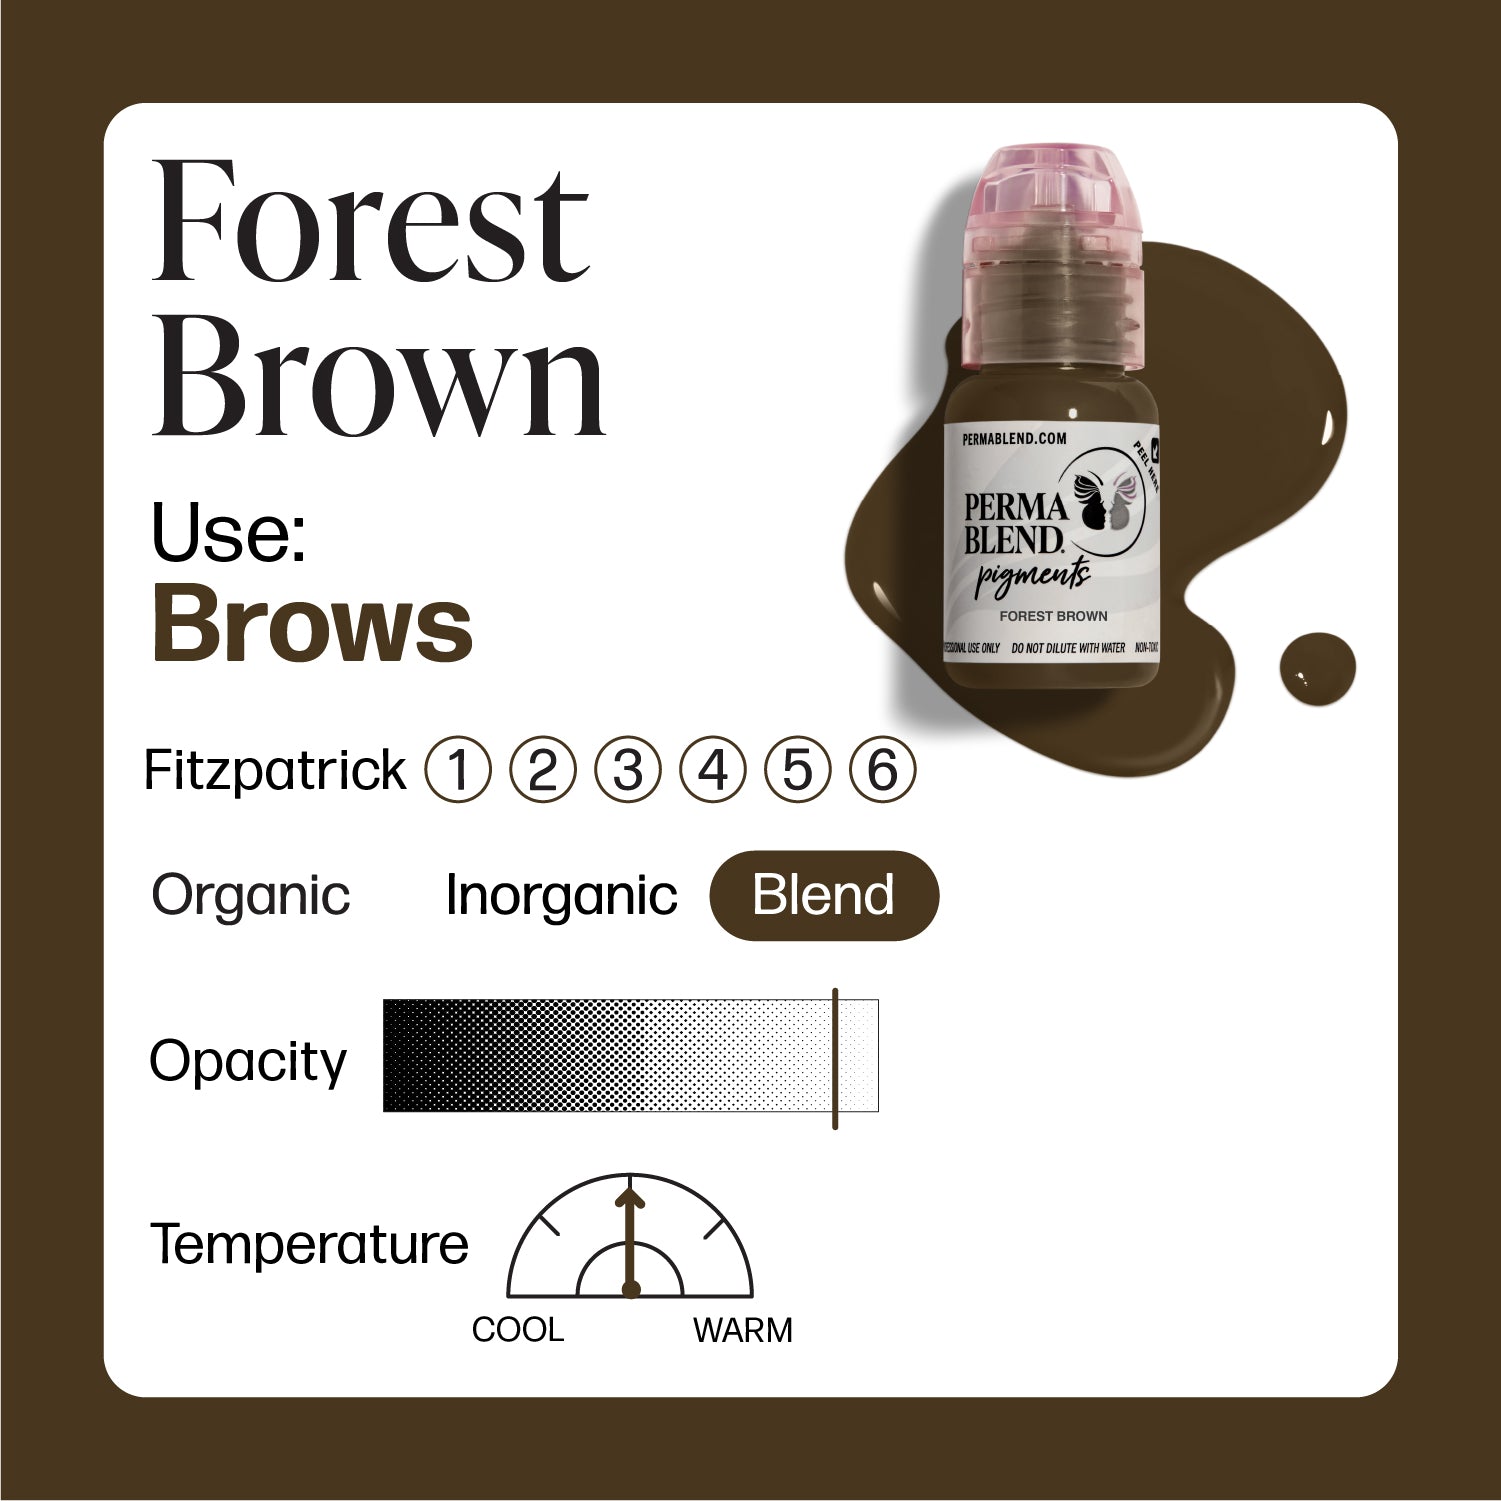 Perma Blend Forest Brown Brow Ink Color Temperature Opacity